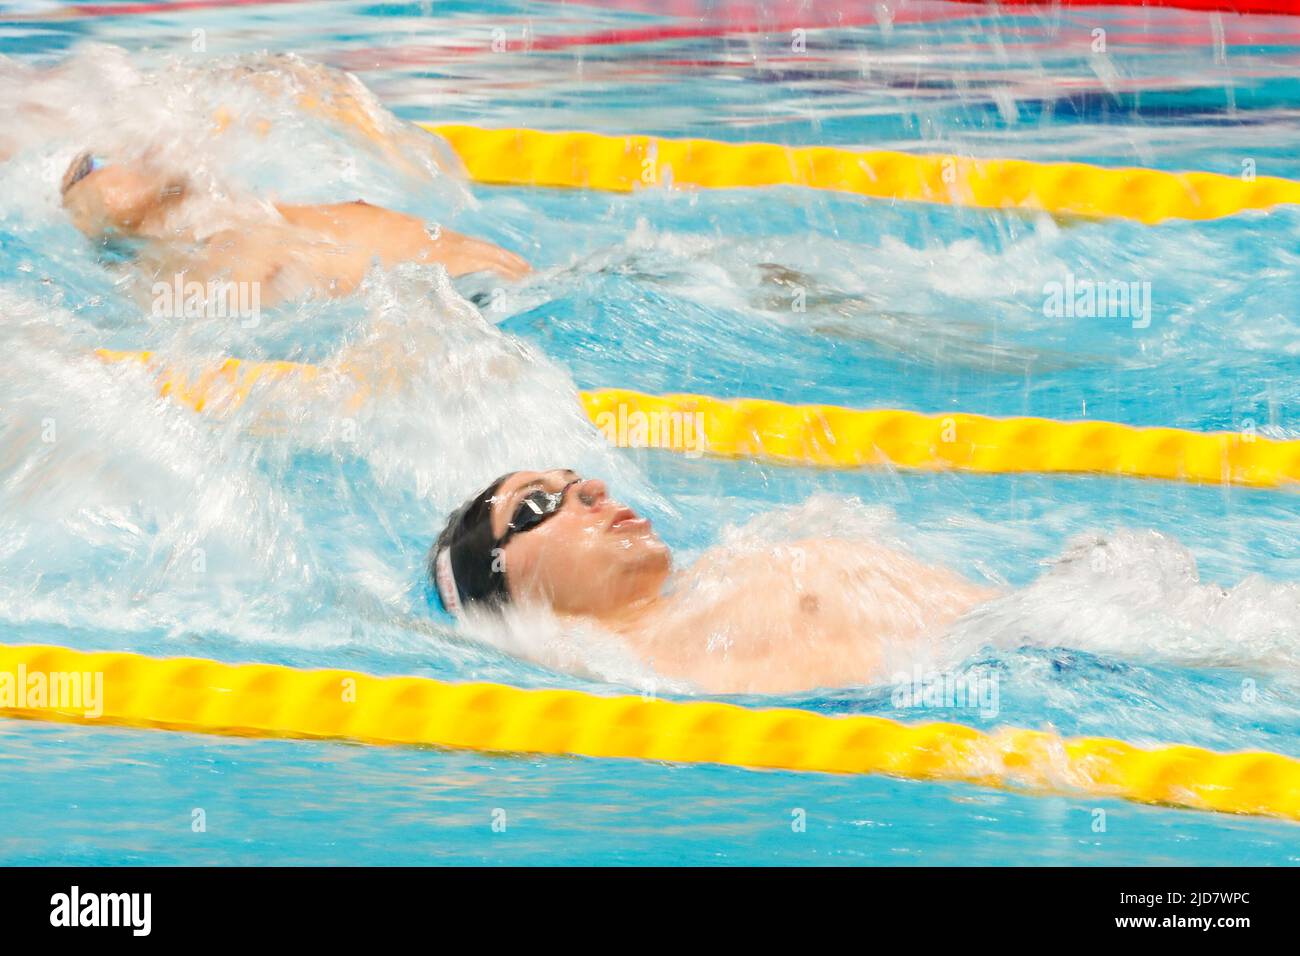 BUDAPEST, HUNGARY - JUNE 19: competing at the Men's 100m Backstroke ...